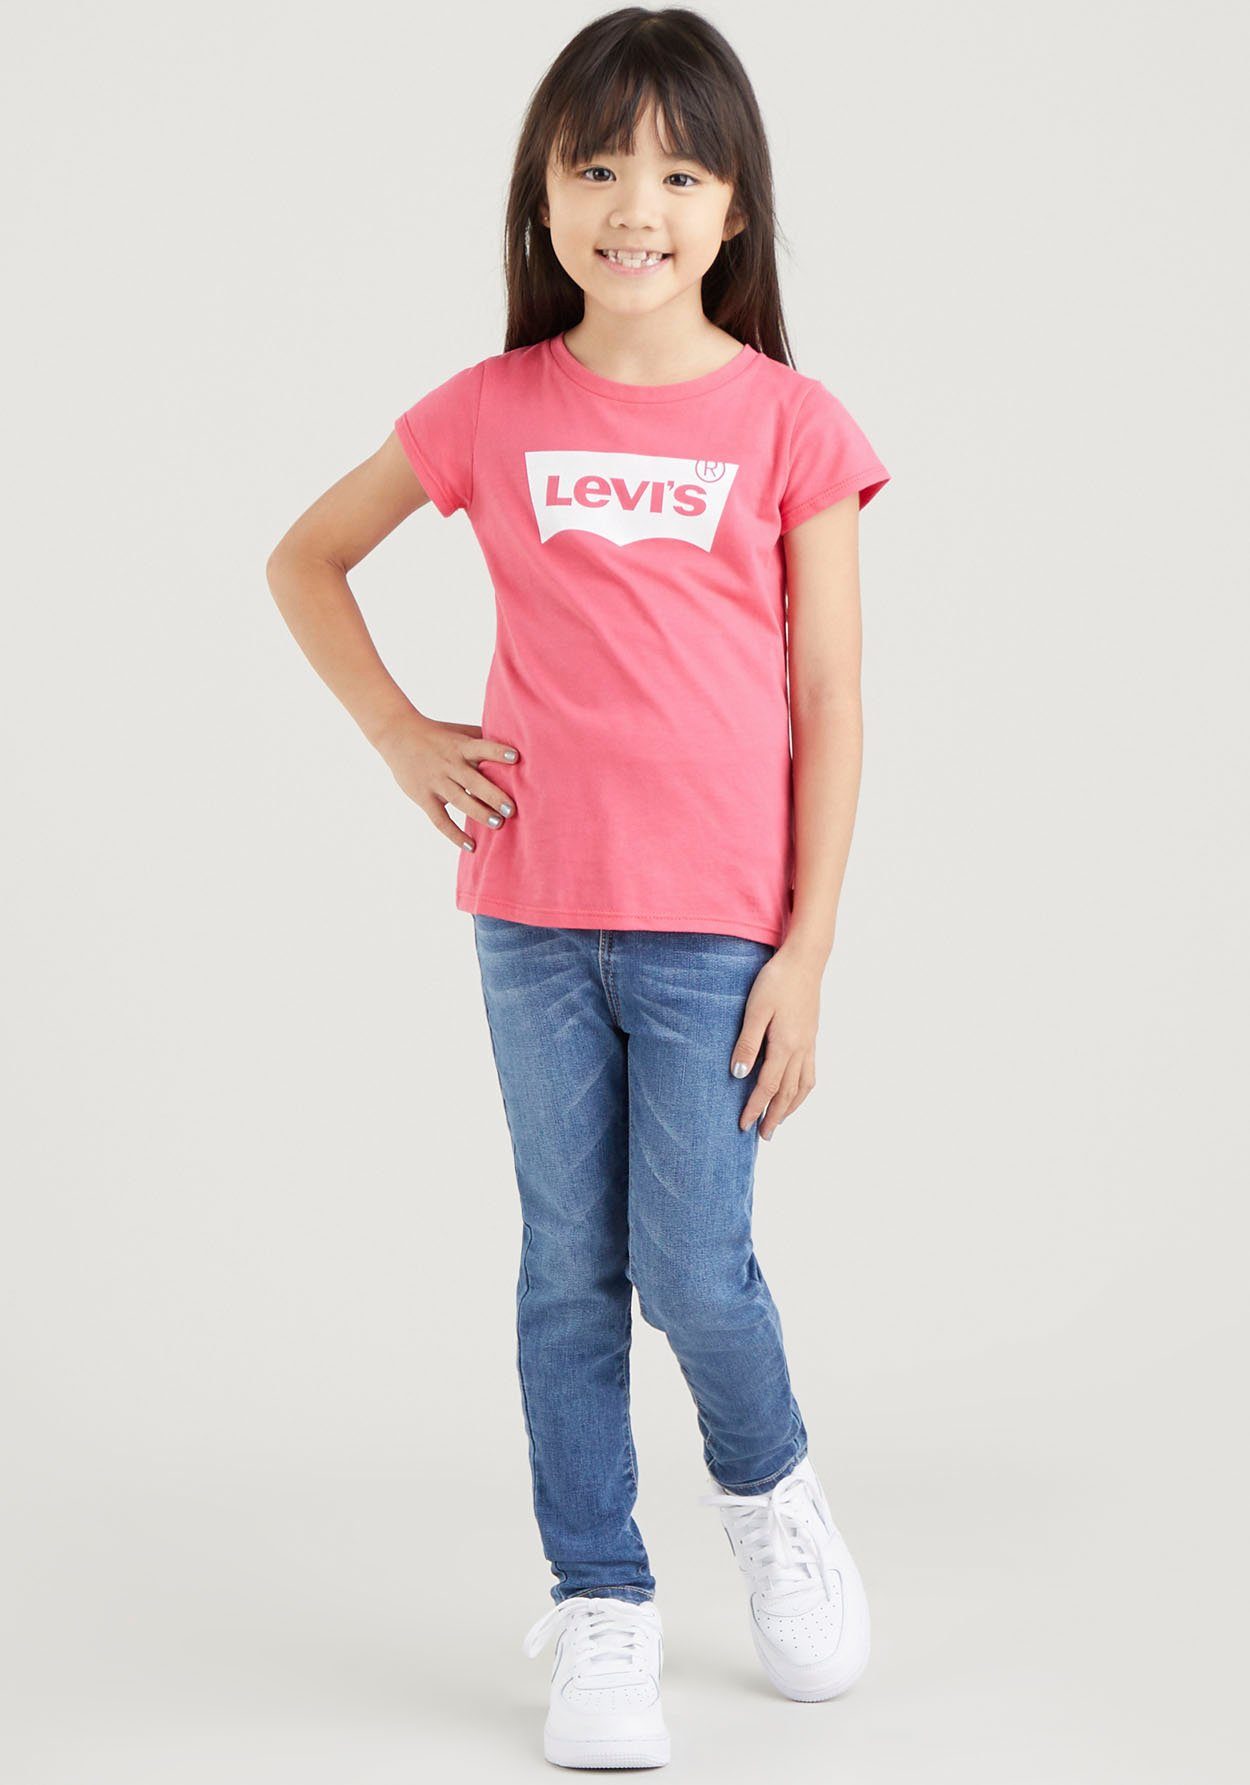 Levi's® Kids Stretch-Jeans 720™ for blue SKINNY used GIRLS HIGH mid RISE SUPER